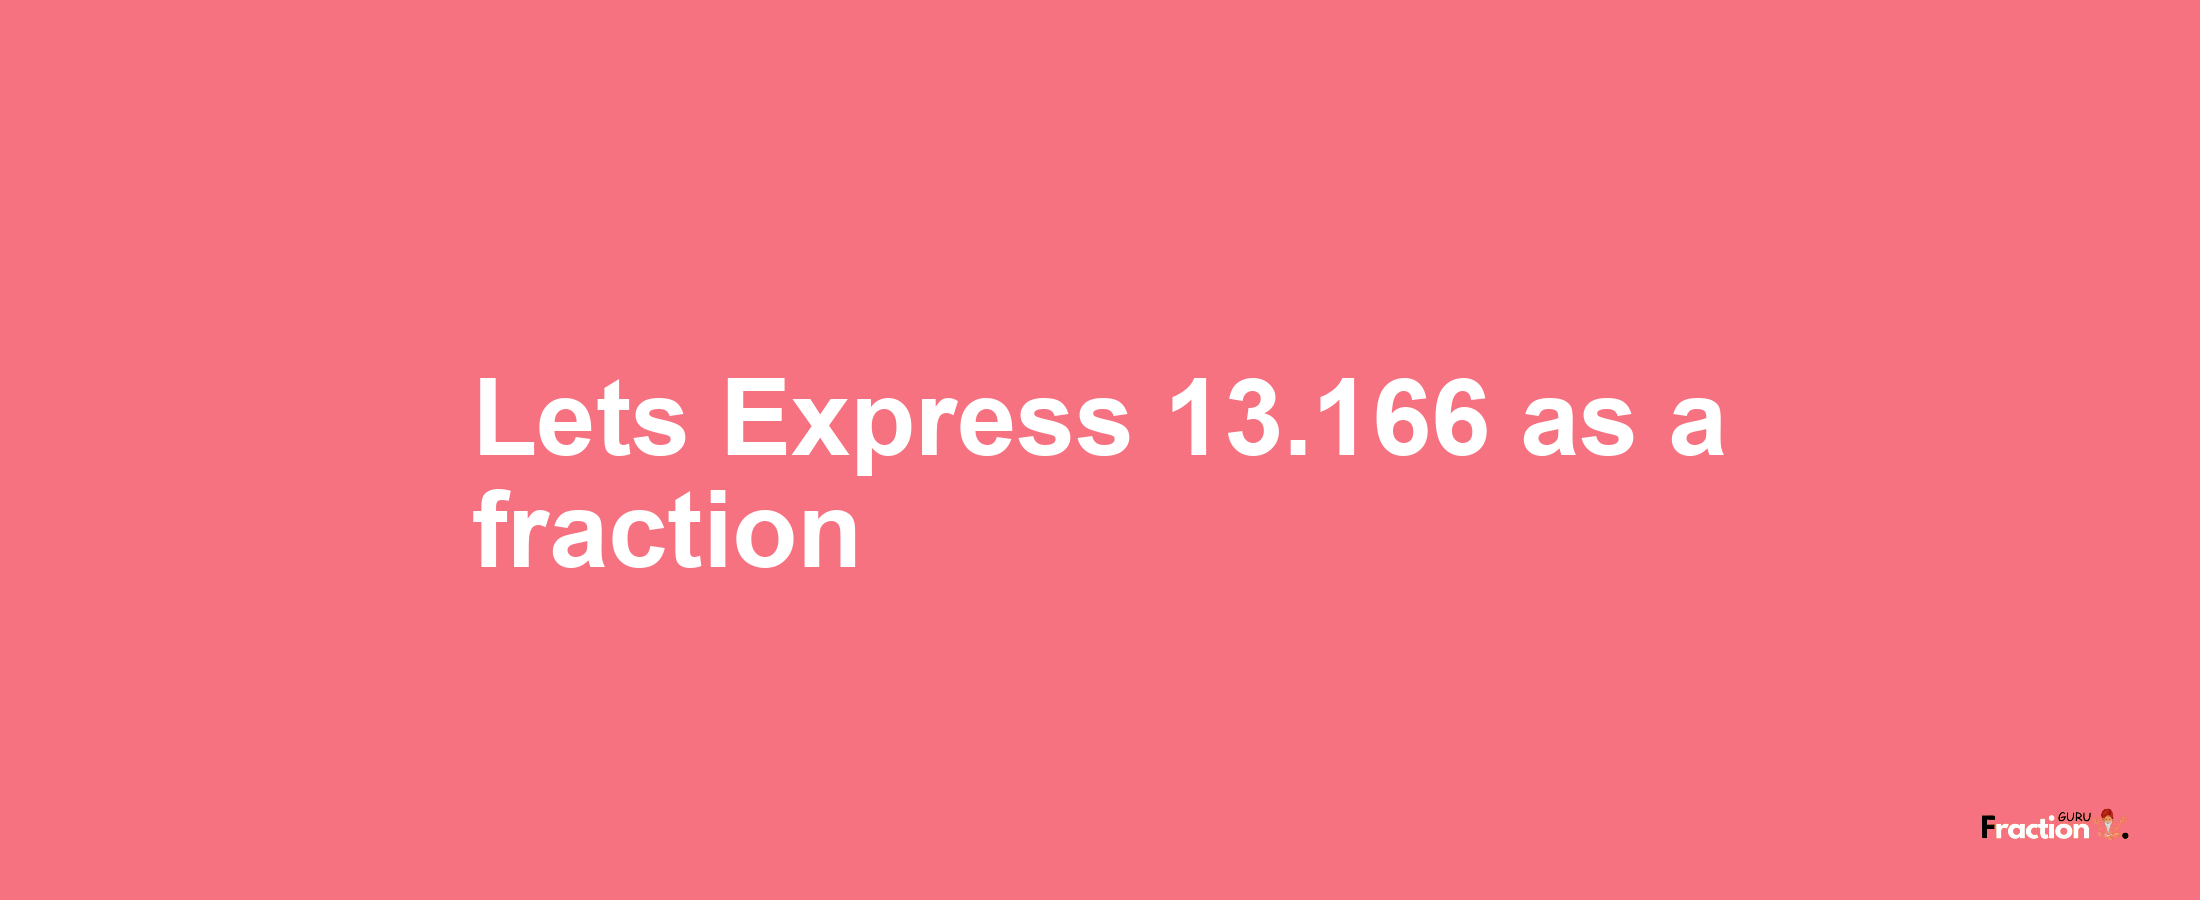 Lets Express 13.166 as afraction